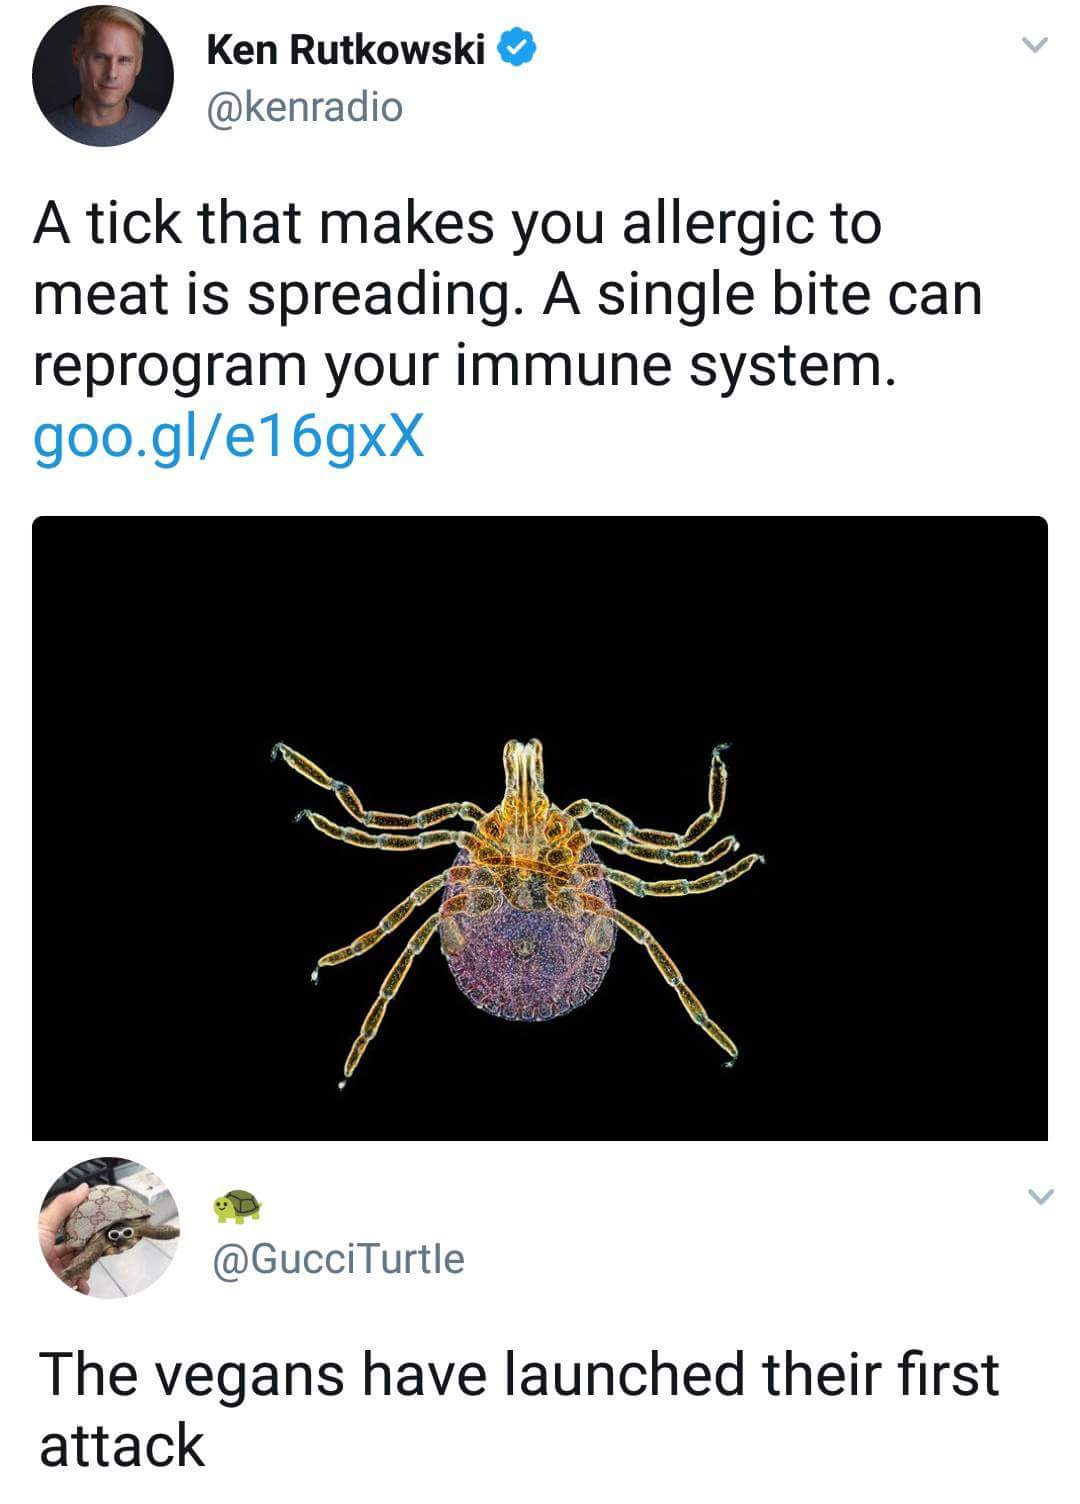 Meme about tick that makes you allergic to meat from just one bite, joked as an attack on us by vegans.